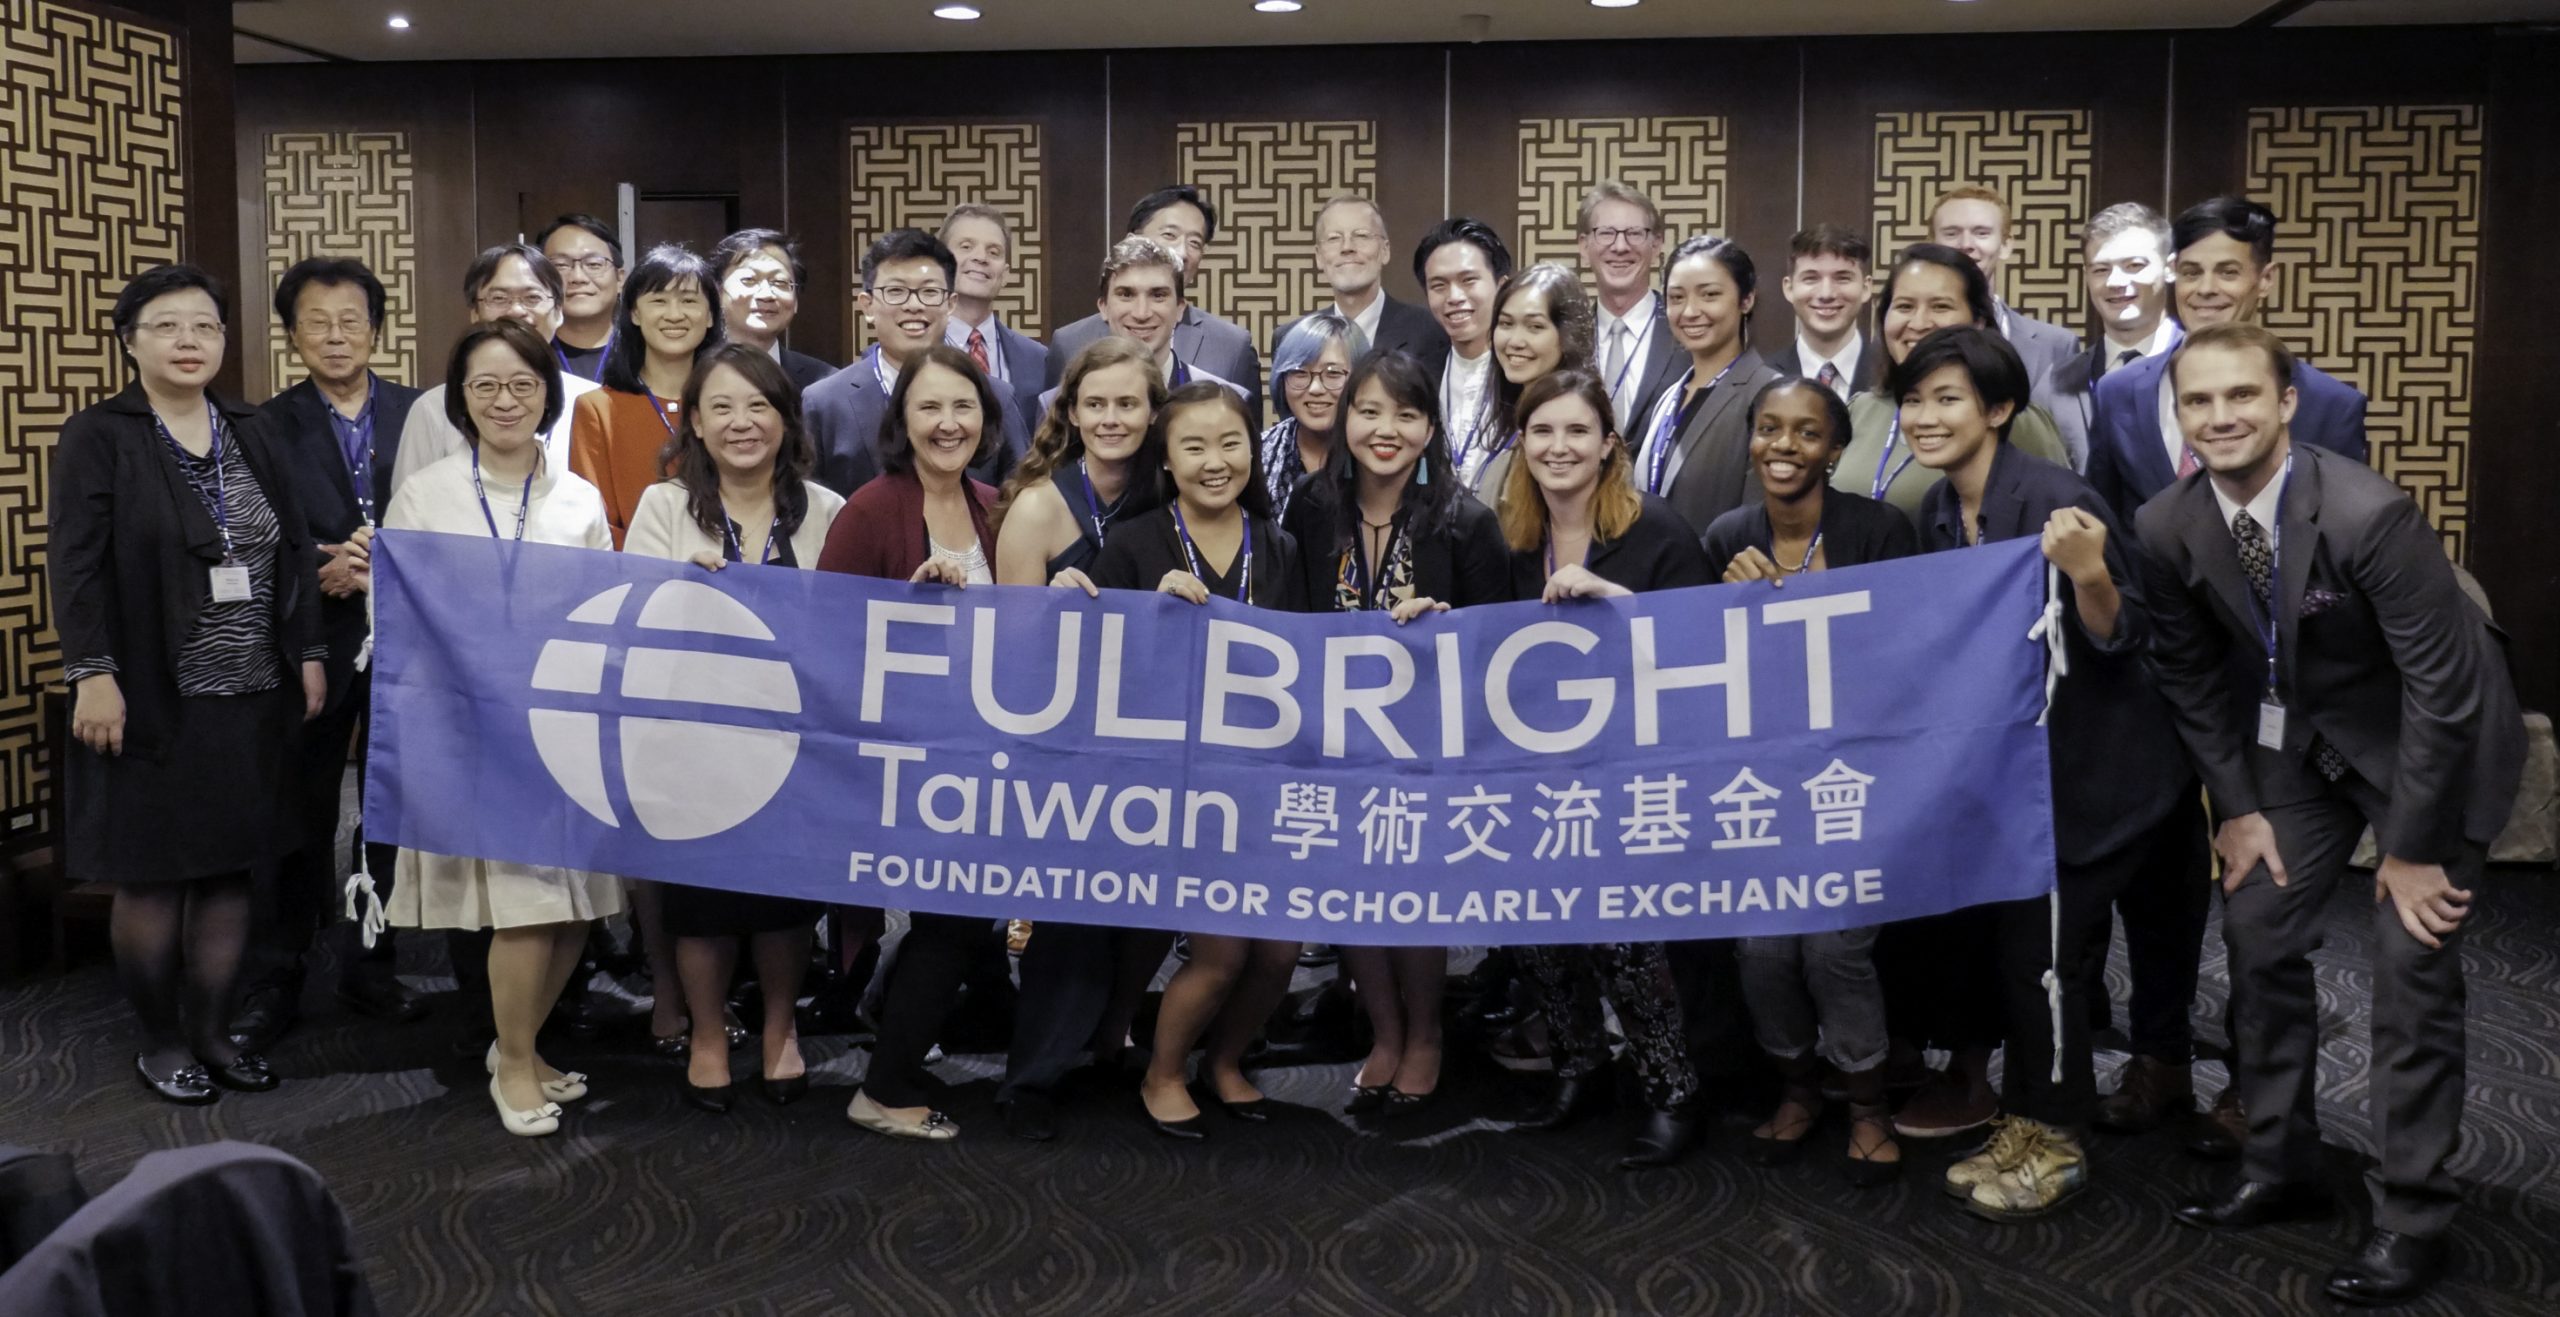 A group of men and women smiling and holding a large blue banner that says Fulbright Taiwan Foundation for Scholarly Exchange in English and in Chinese characters